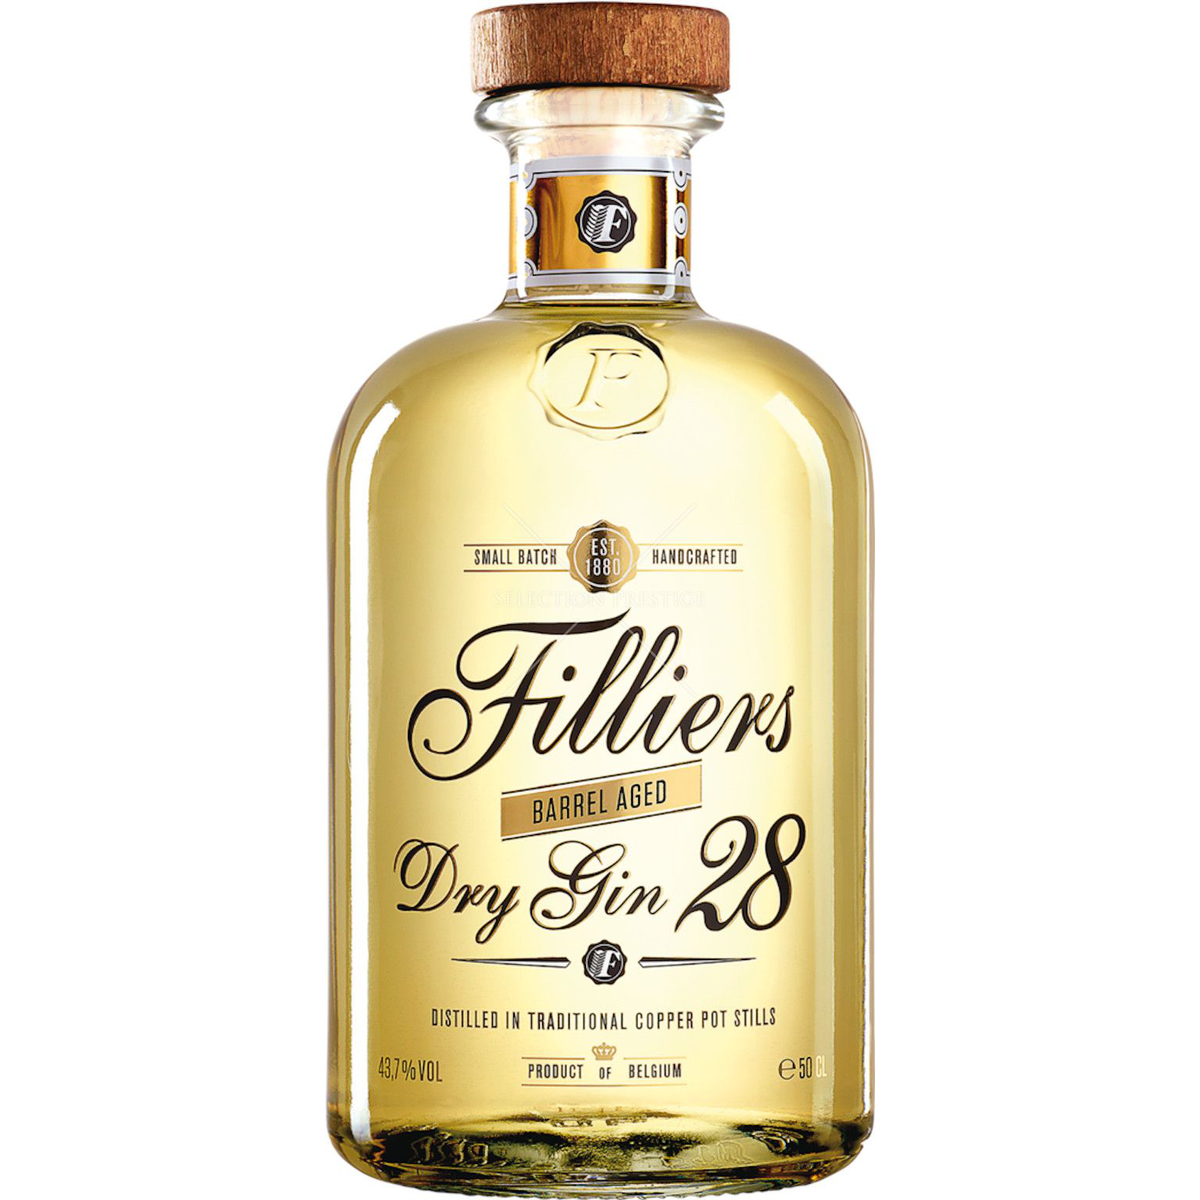 0,5L | Winebuyers Barrel 43,7% Aged 28 Filliers Vol. Gin Dry